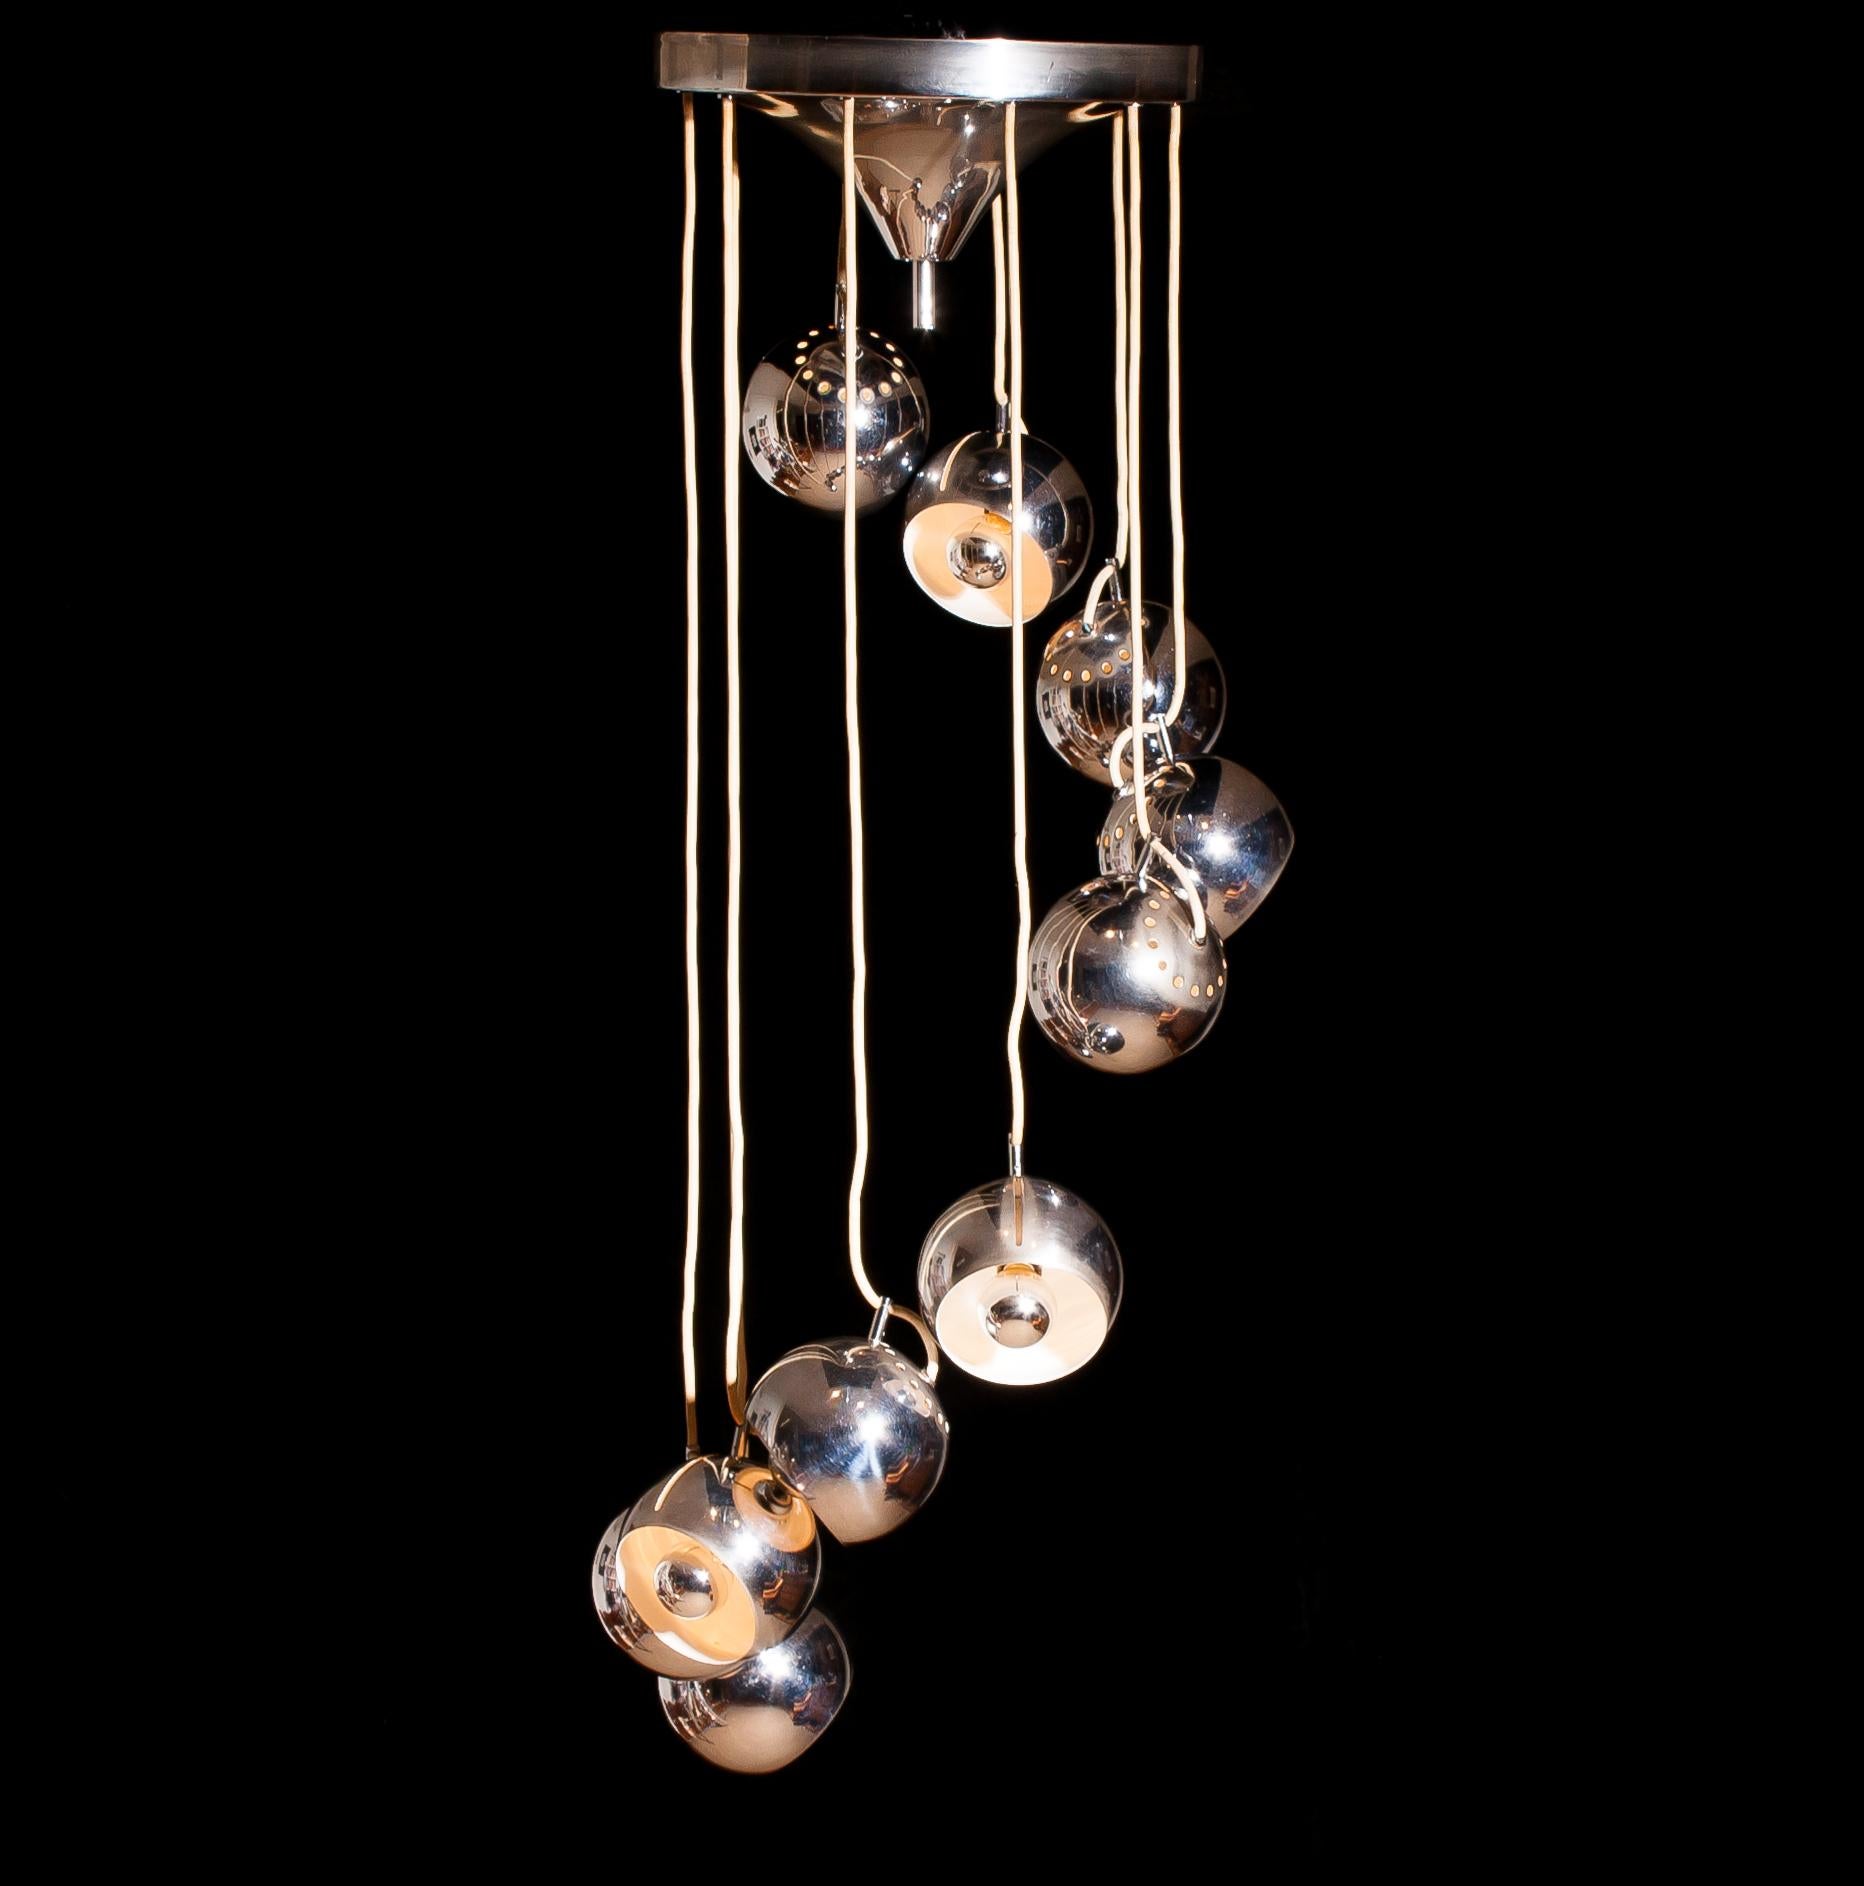 Space Age 1960s, Chromed Waterfall Chandelier with Adjustable Globes by Lampadari Reggiani